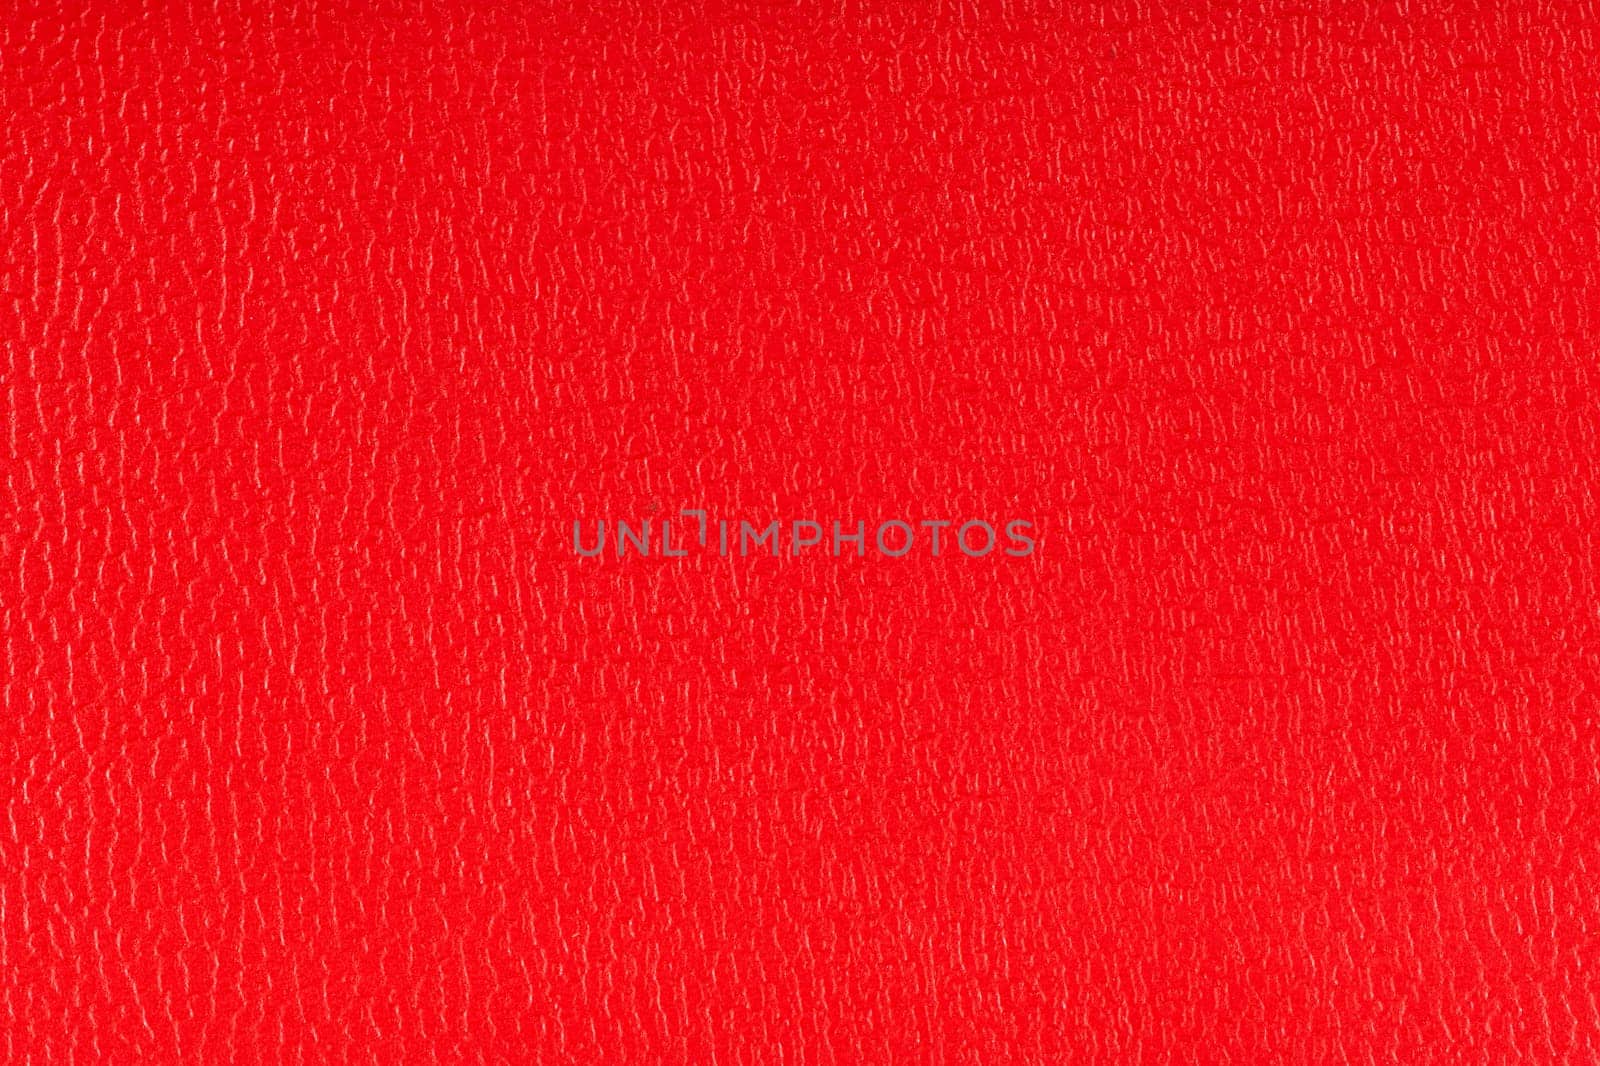 Red artificial leather texture background.